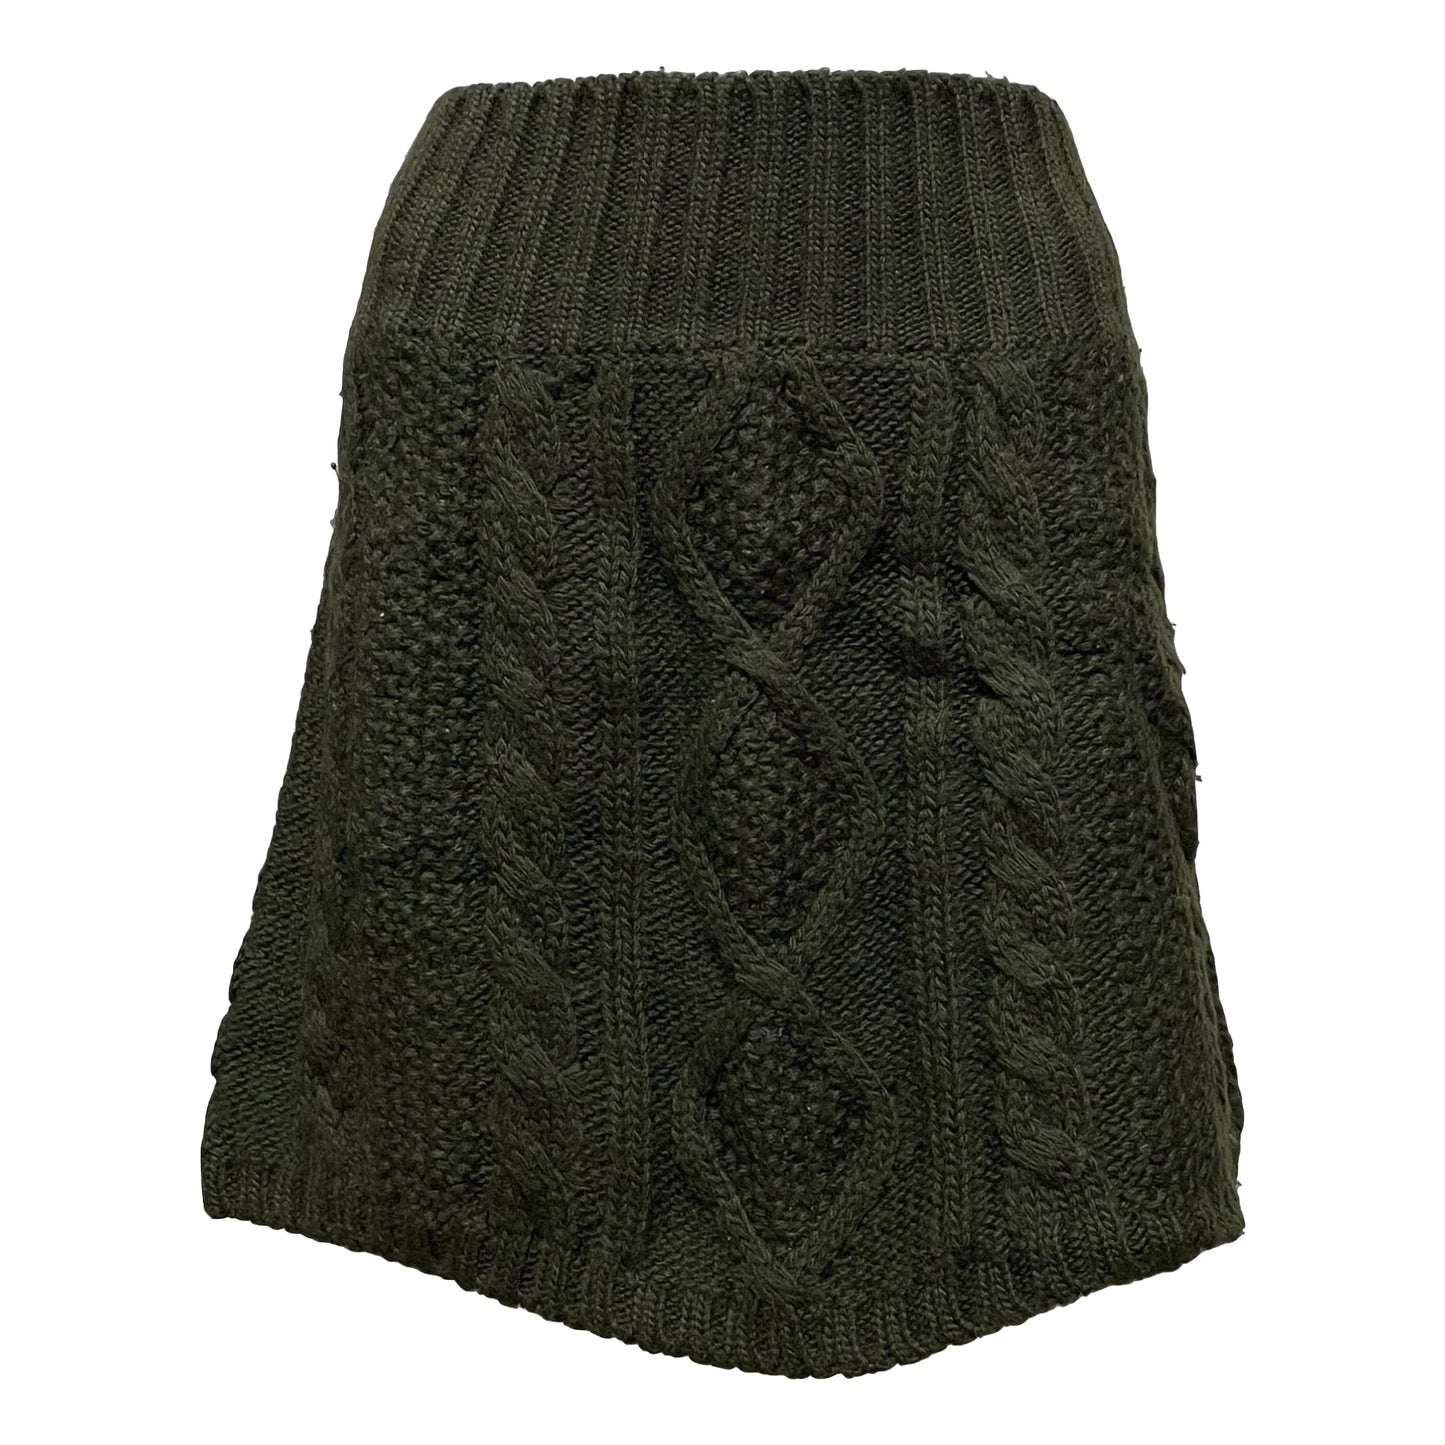 UNDERCOVER Fall Winter 1998 "Exchange" Knit Wrap Skirt